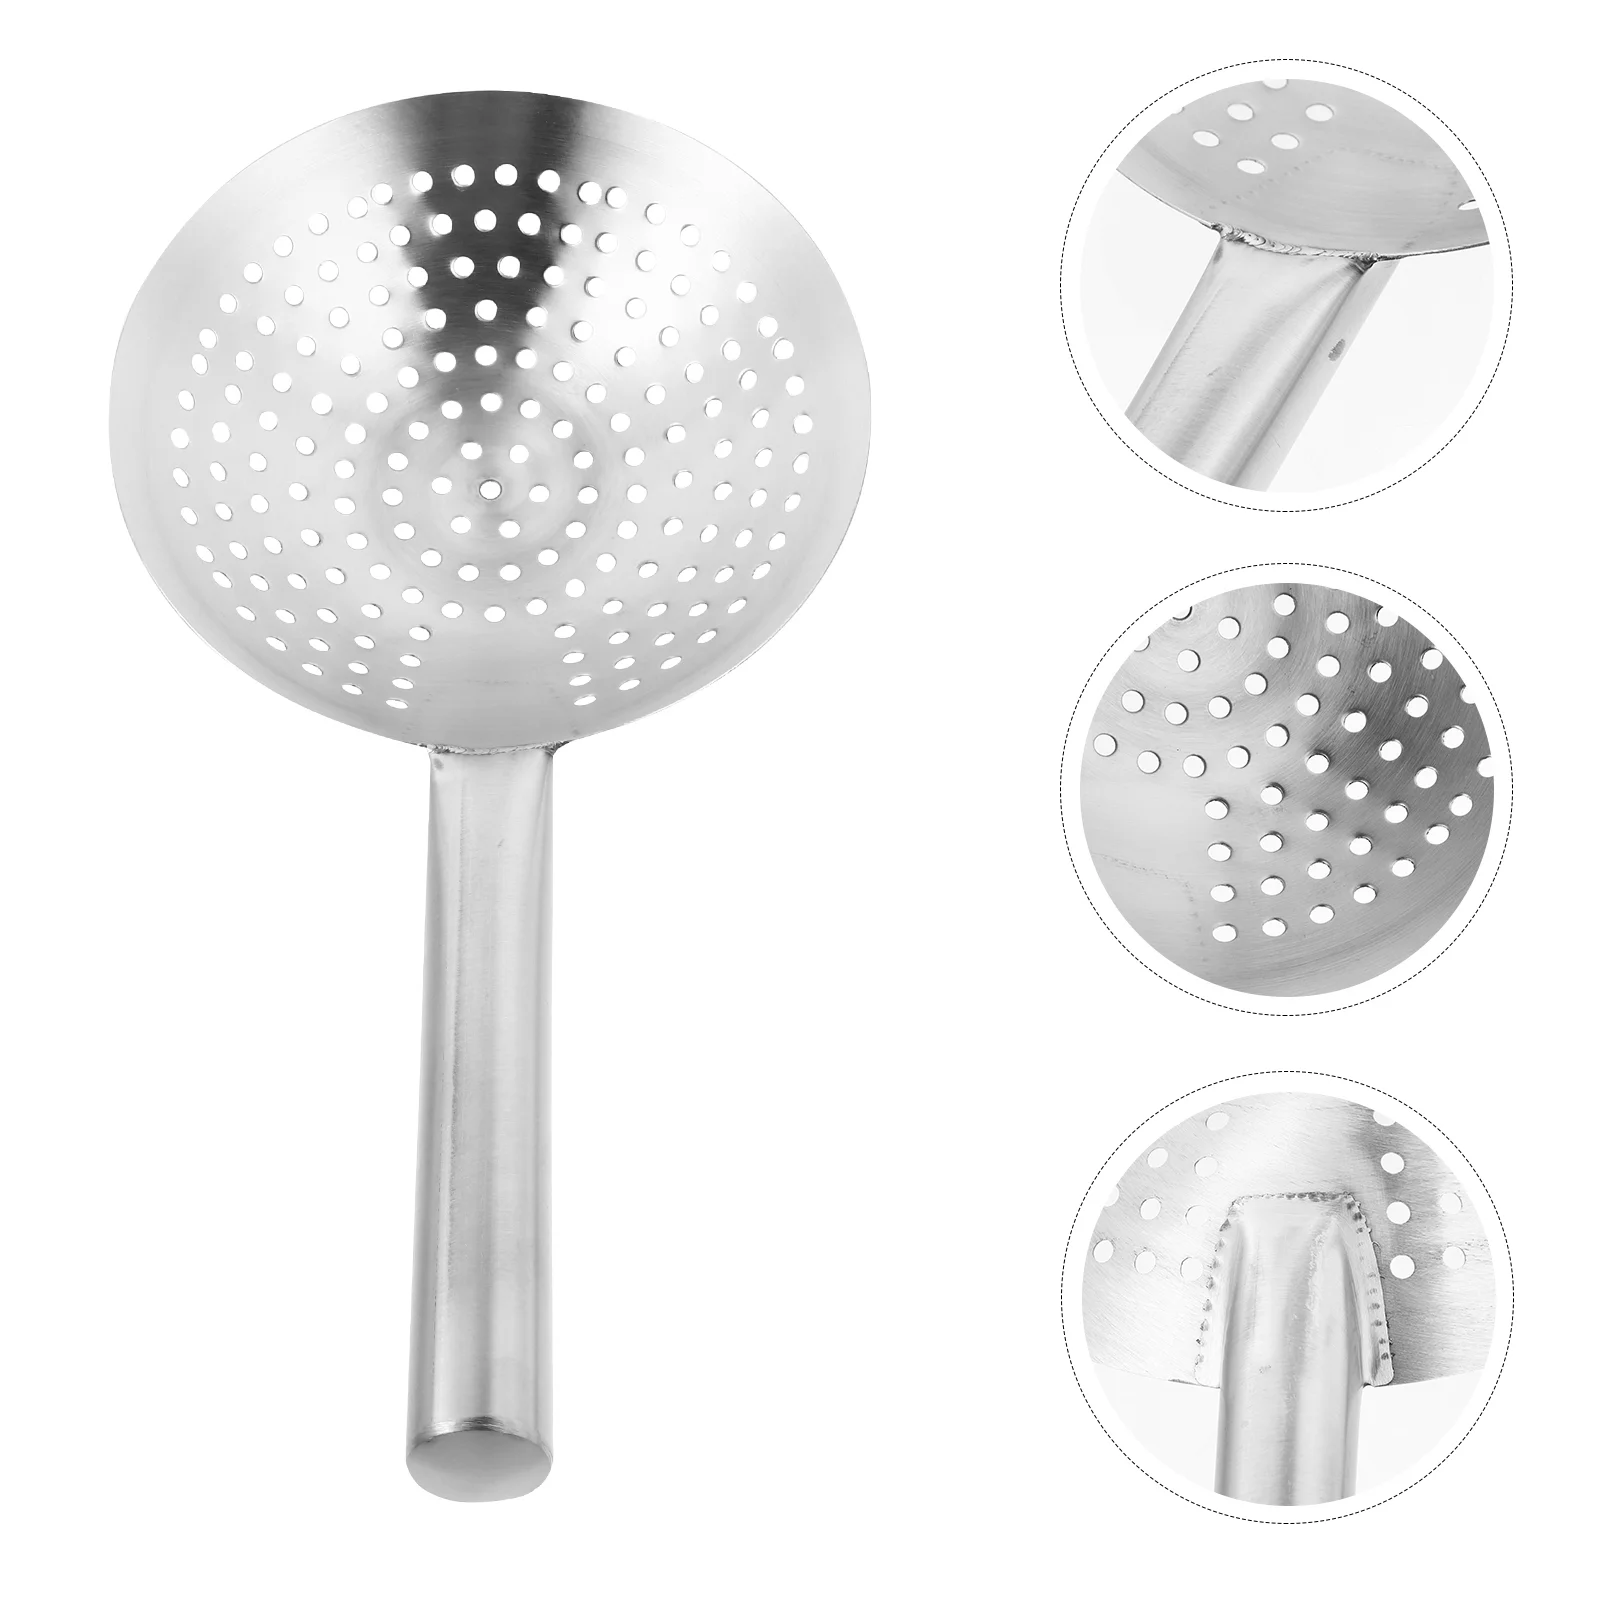 

Strainer Spoon Skimmer Ladle Slotted Colander Filter Kitchen Cooking Frying Metal Pasta Stainless Steel Oil Mesh Scoop Food Wire